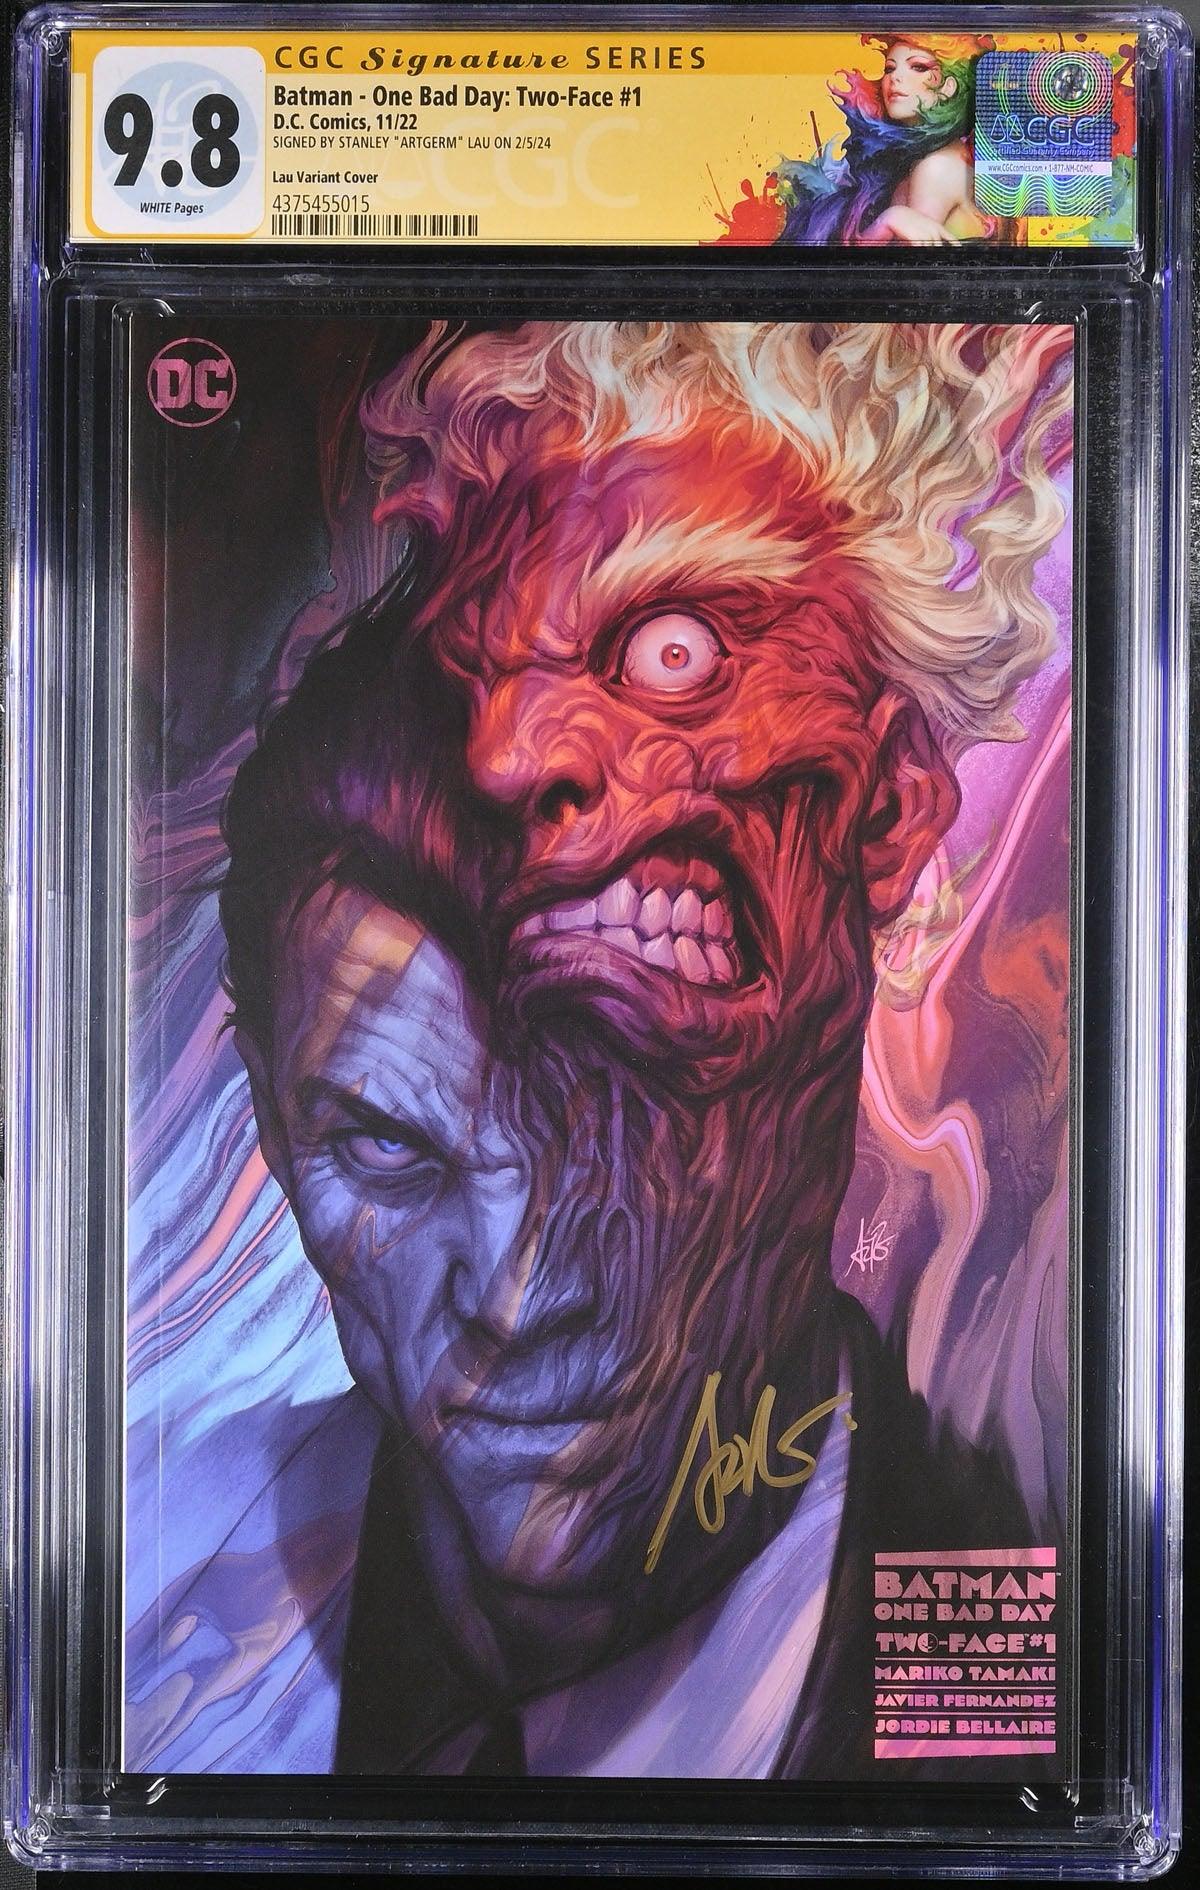 CGC BATMAN ONE BAD DAY TWO-FACE #1 1:25 LAU VARIANT (9.8) SIGNATURE SERIES - SIGNED BY STANLEY "ARTGERM" - Kings Comics